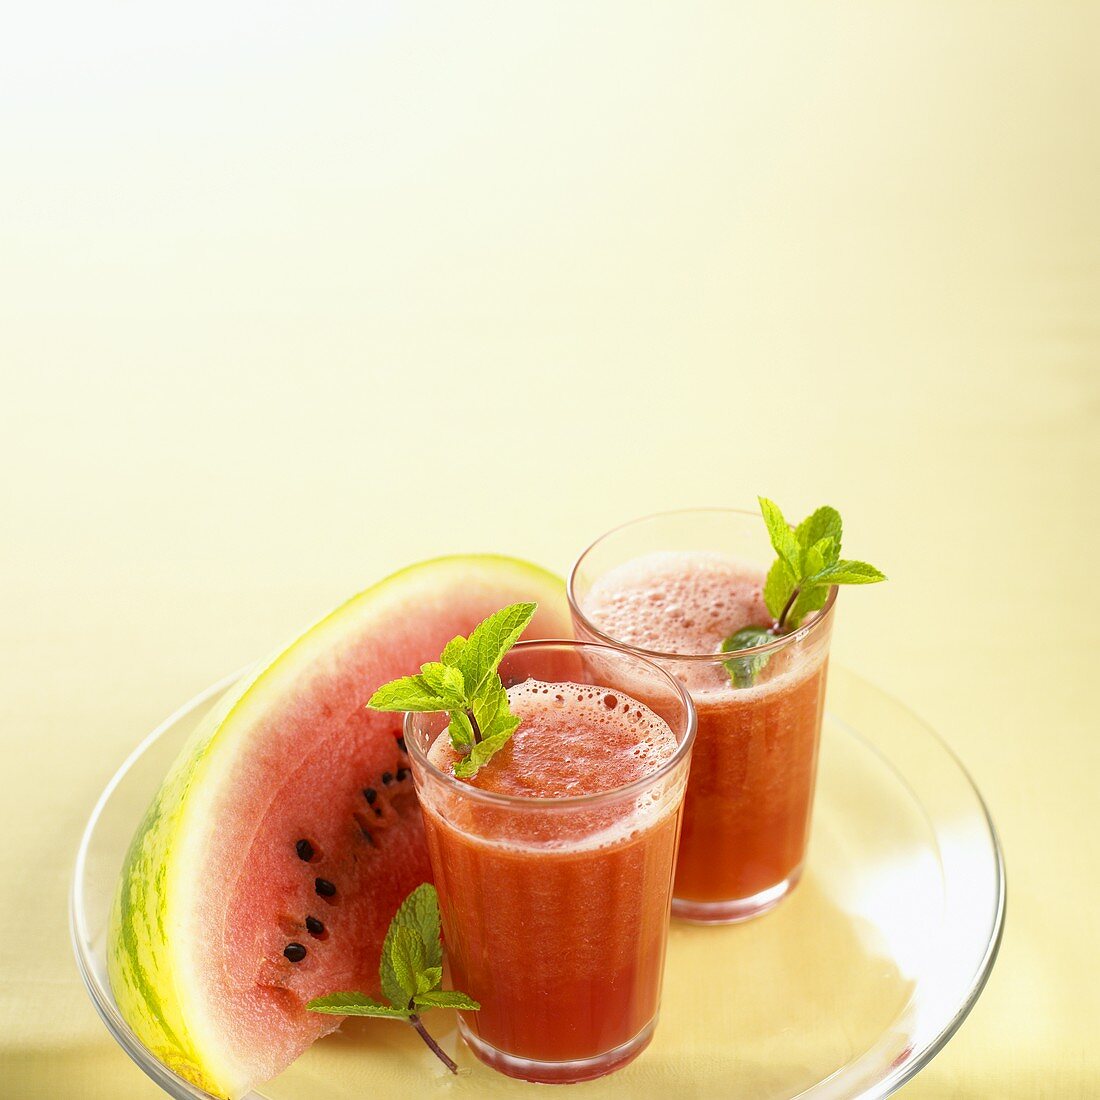 Watermelon juice in juice glasses with wedge of melon